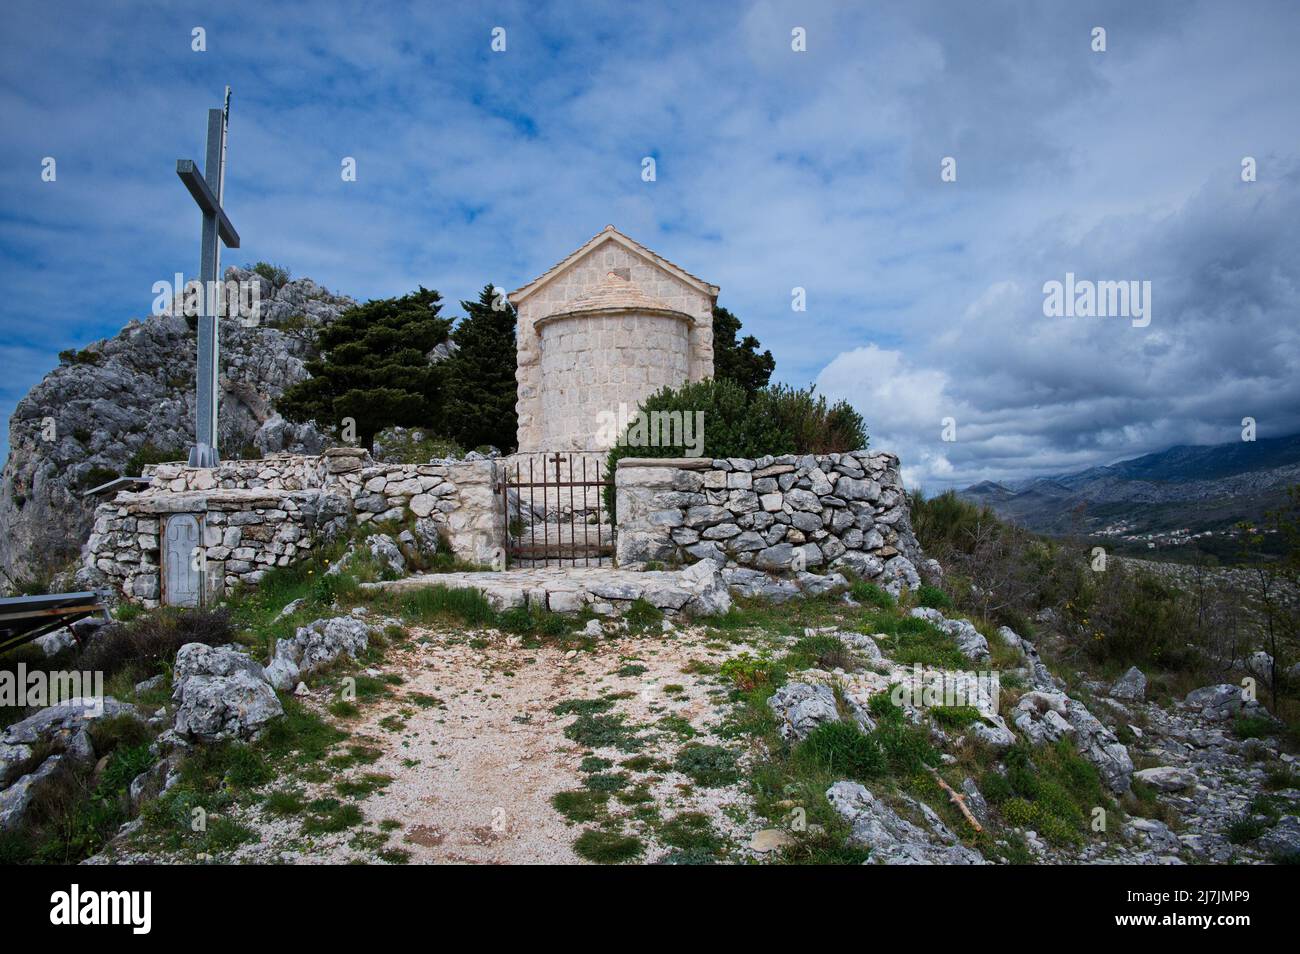 Small medieval stone church on the top of the hill Stock Photo